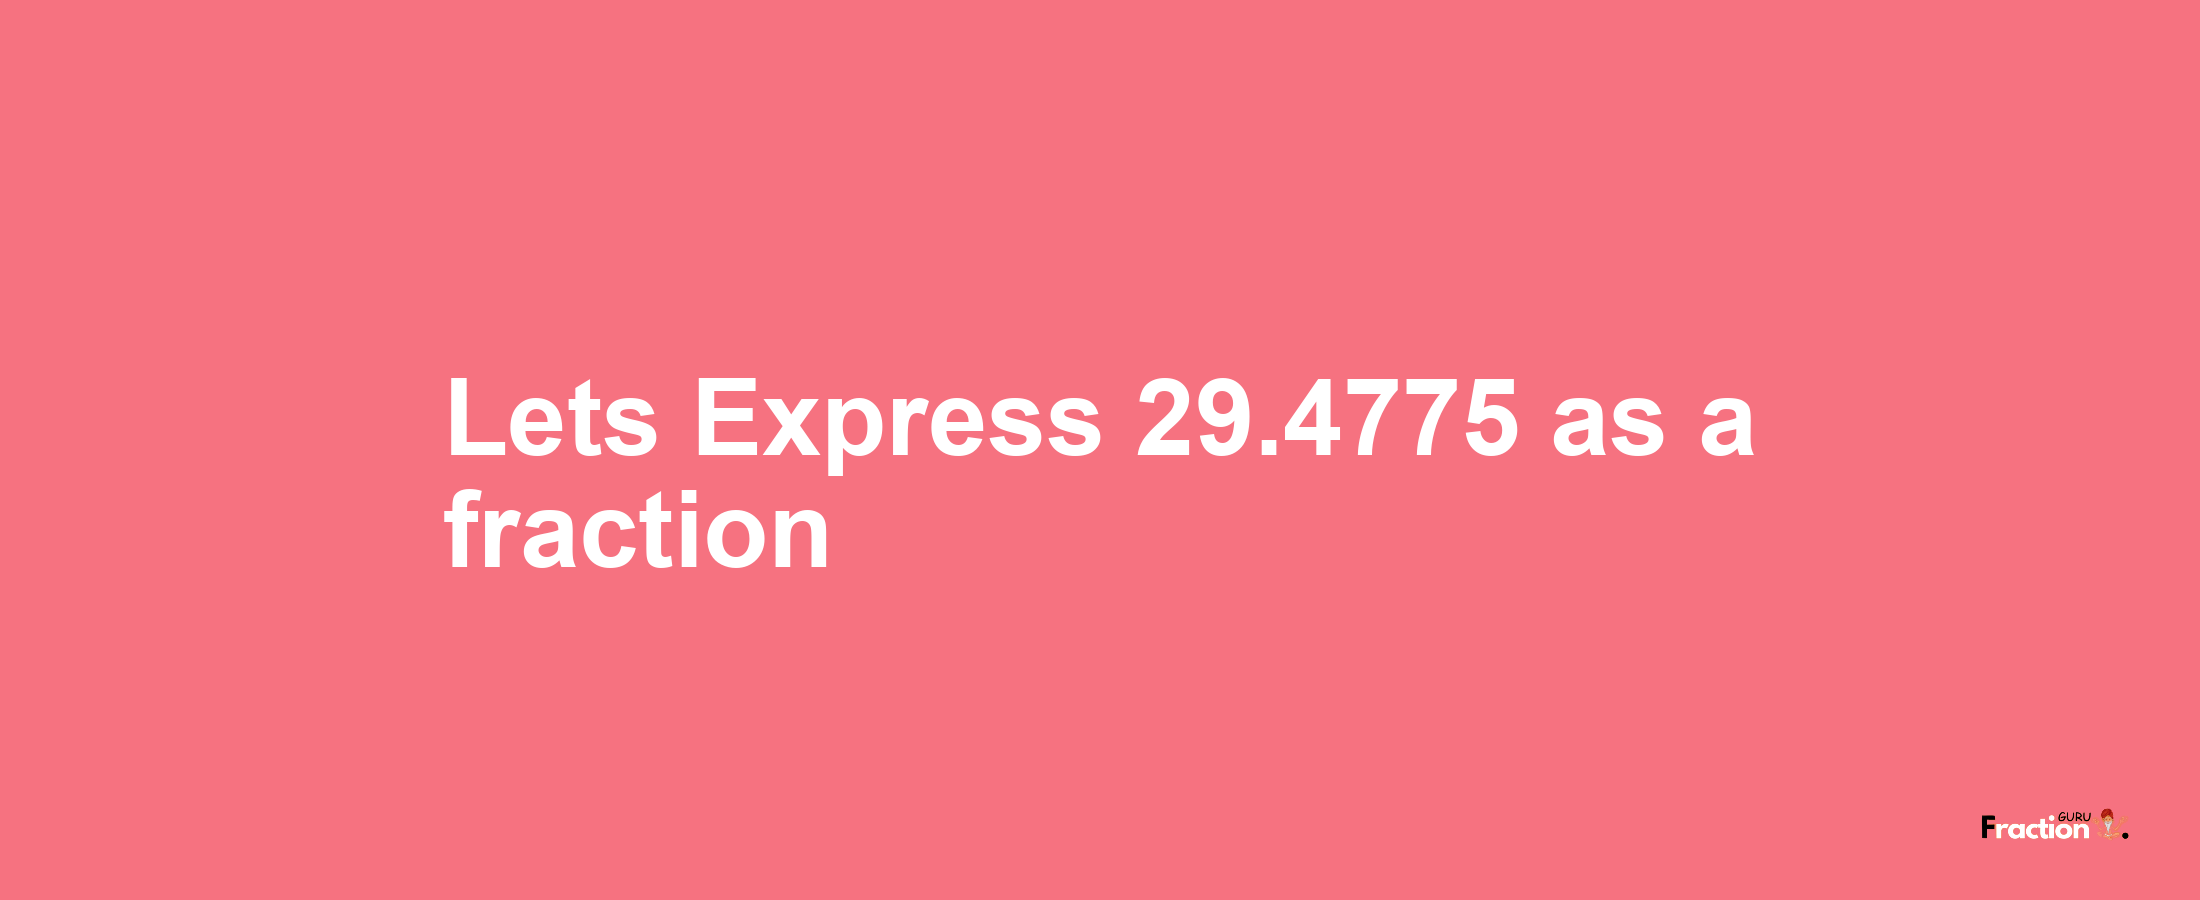 Lets Express 29.4775 as afraction